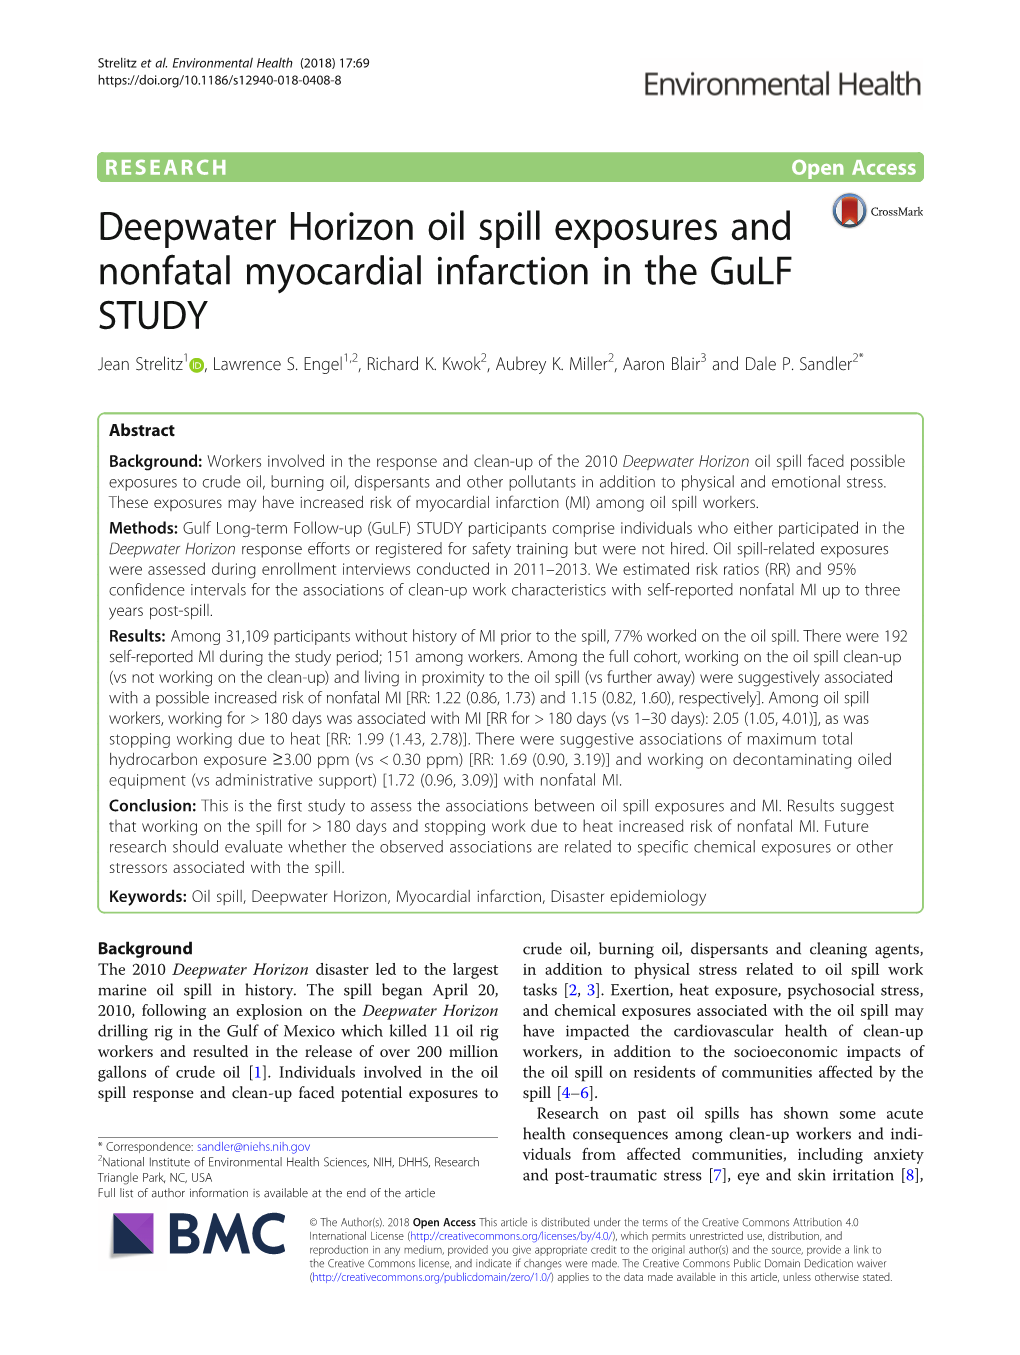 Deepwater Horizon Oil Spill Exposures and Nonfatal Myocardial Infarction in the Gulf STUDY Jean Strelitz1 , Lawrence S